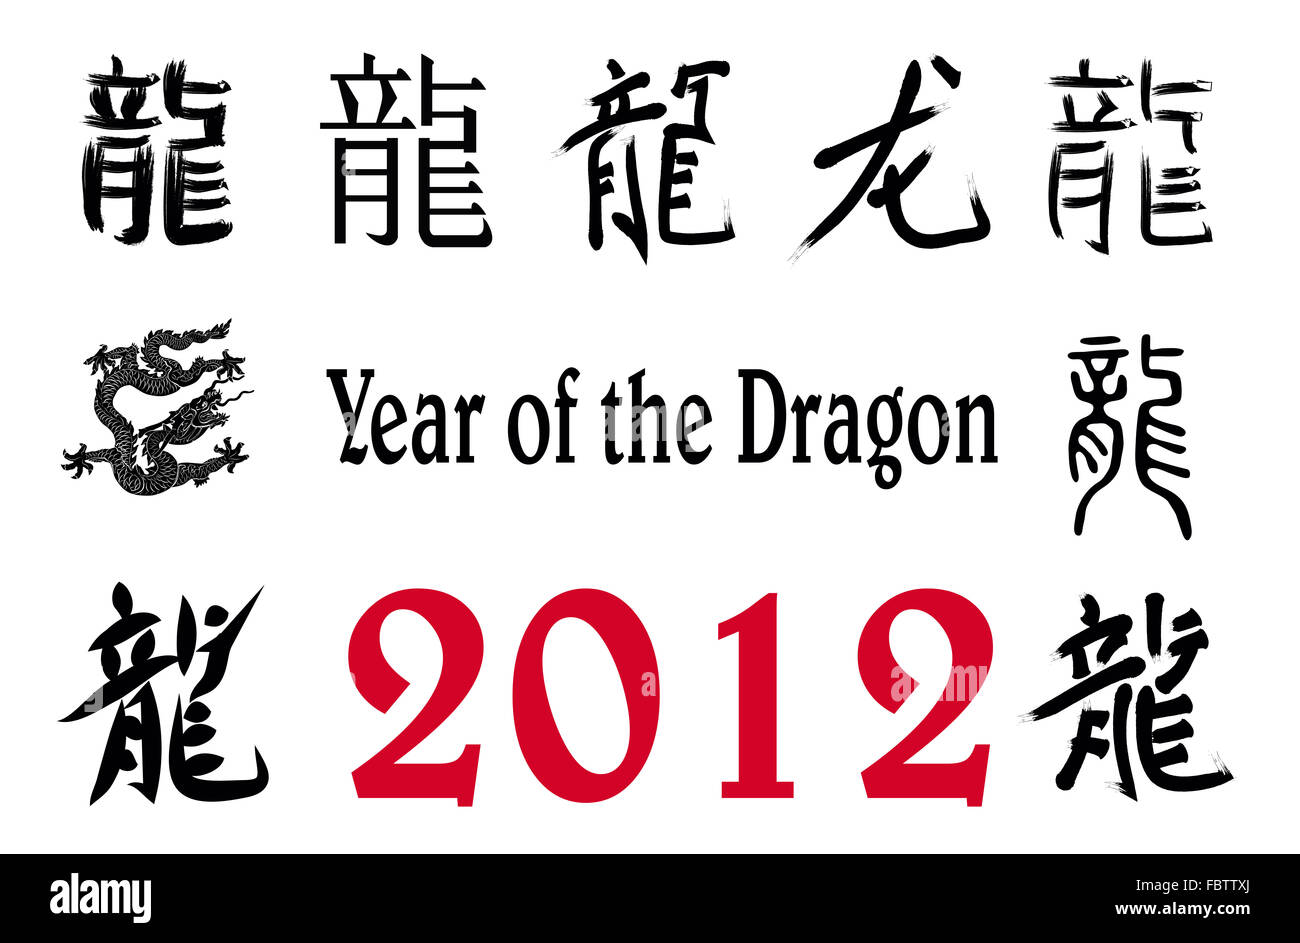 2012 Year of the Dragon design Stock Photo